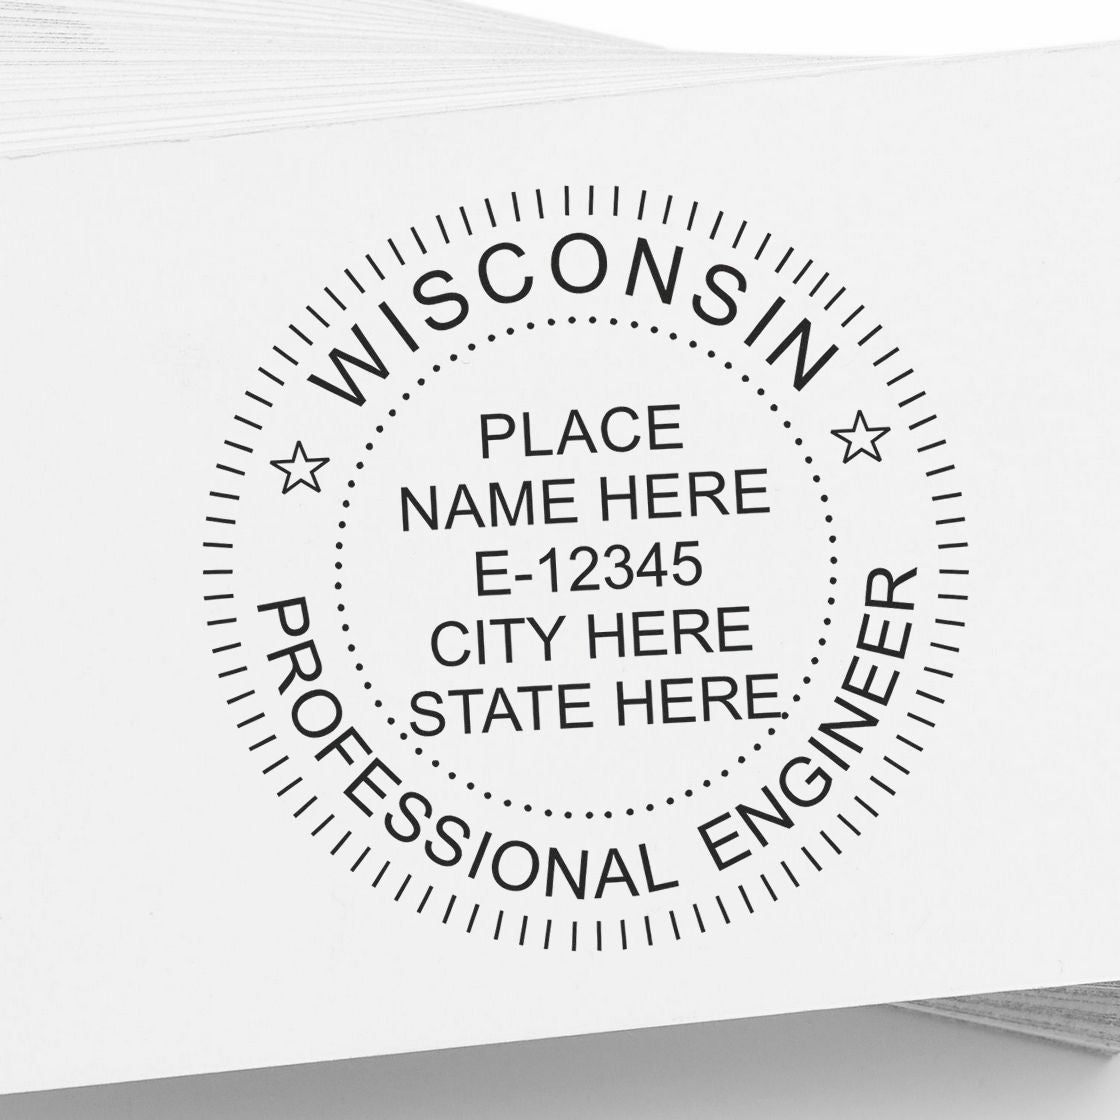 Another Example of a stamped impression of the Wisconsin Professional Engineer Seal Stamp on a piece of office paper.